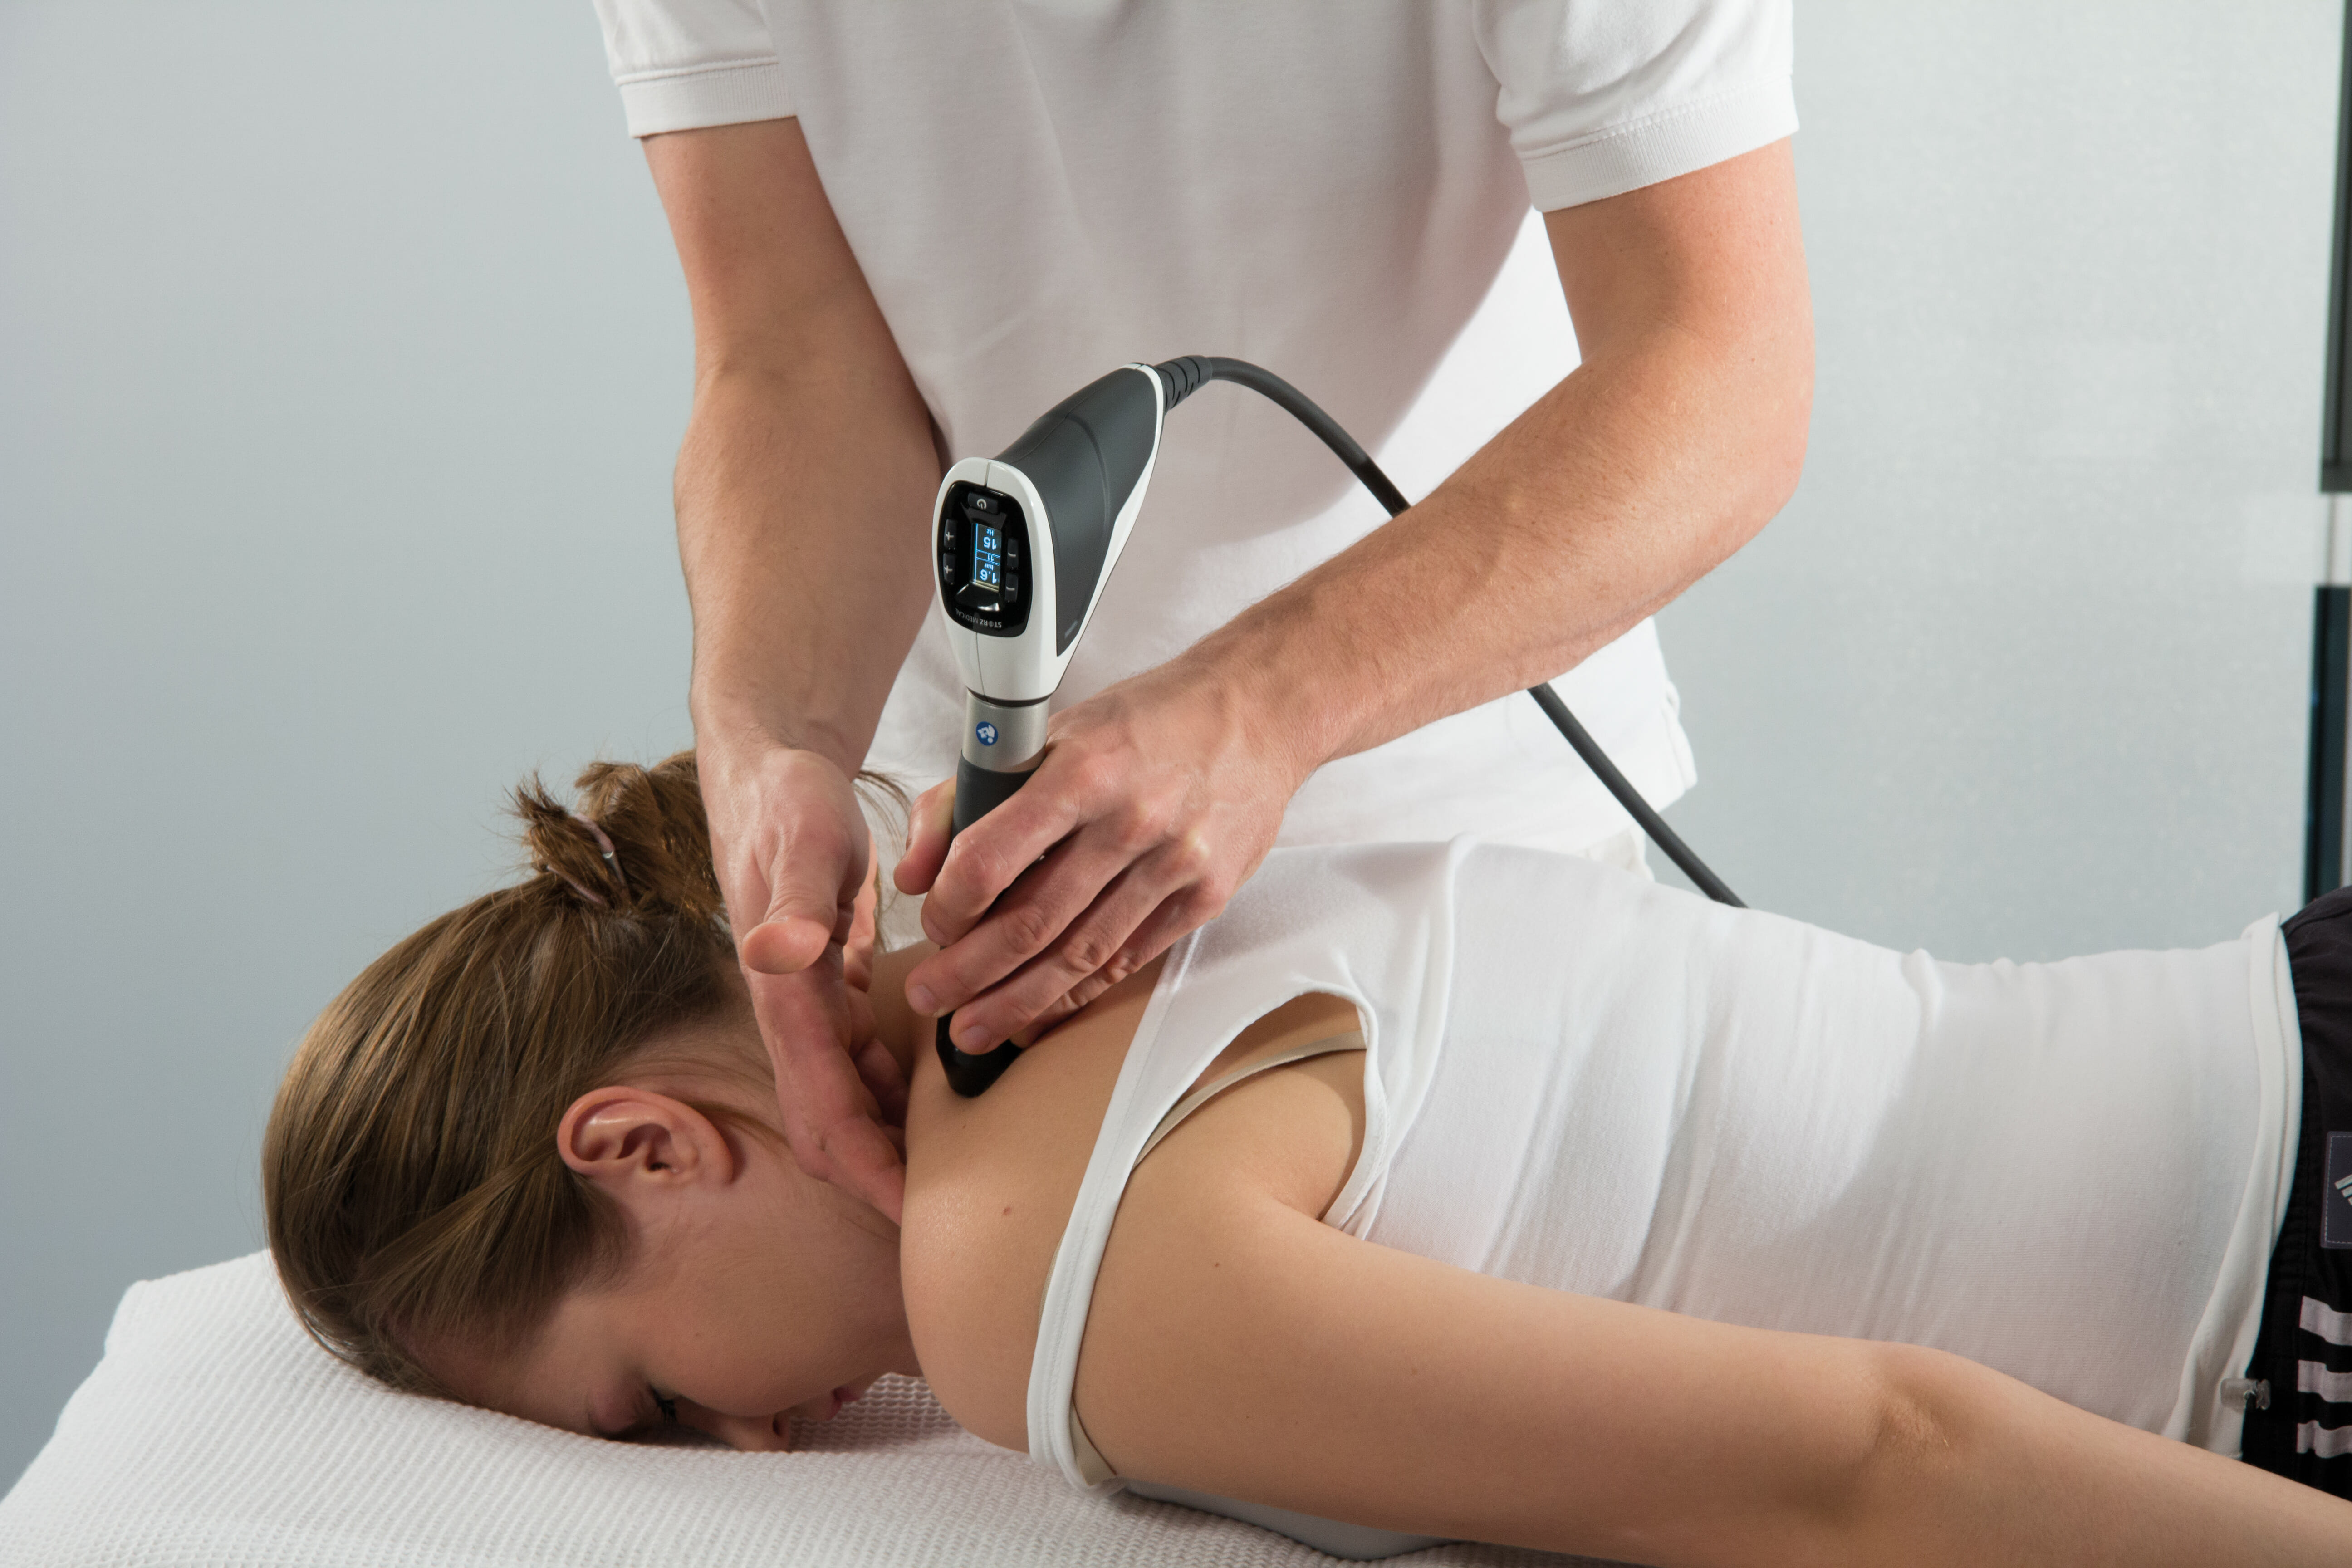 shockwave therapy for plantar fasciitis nhs